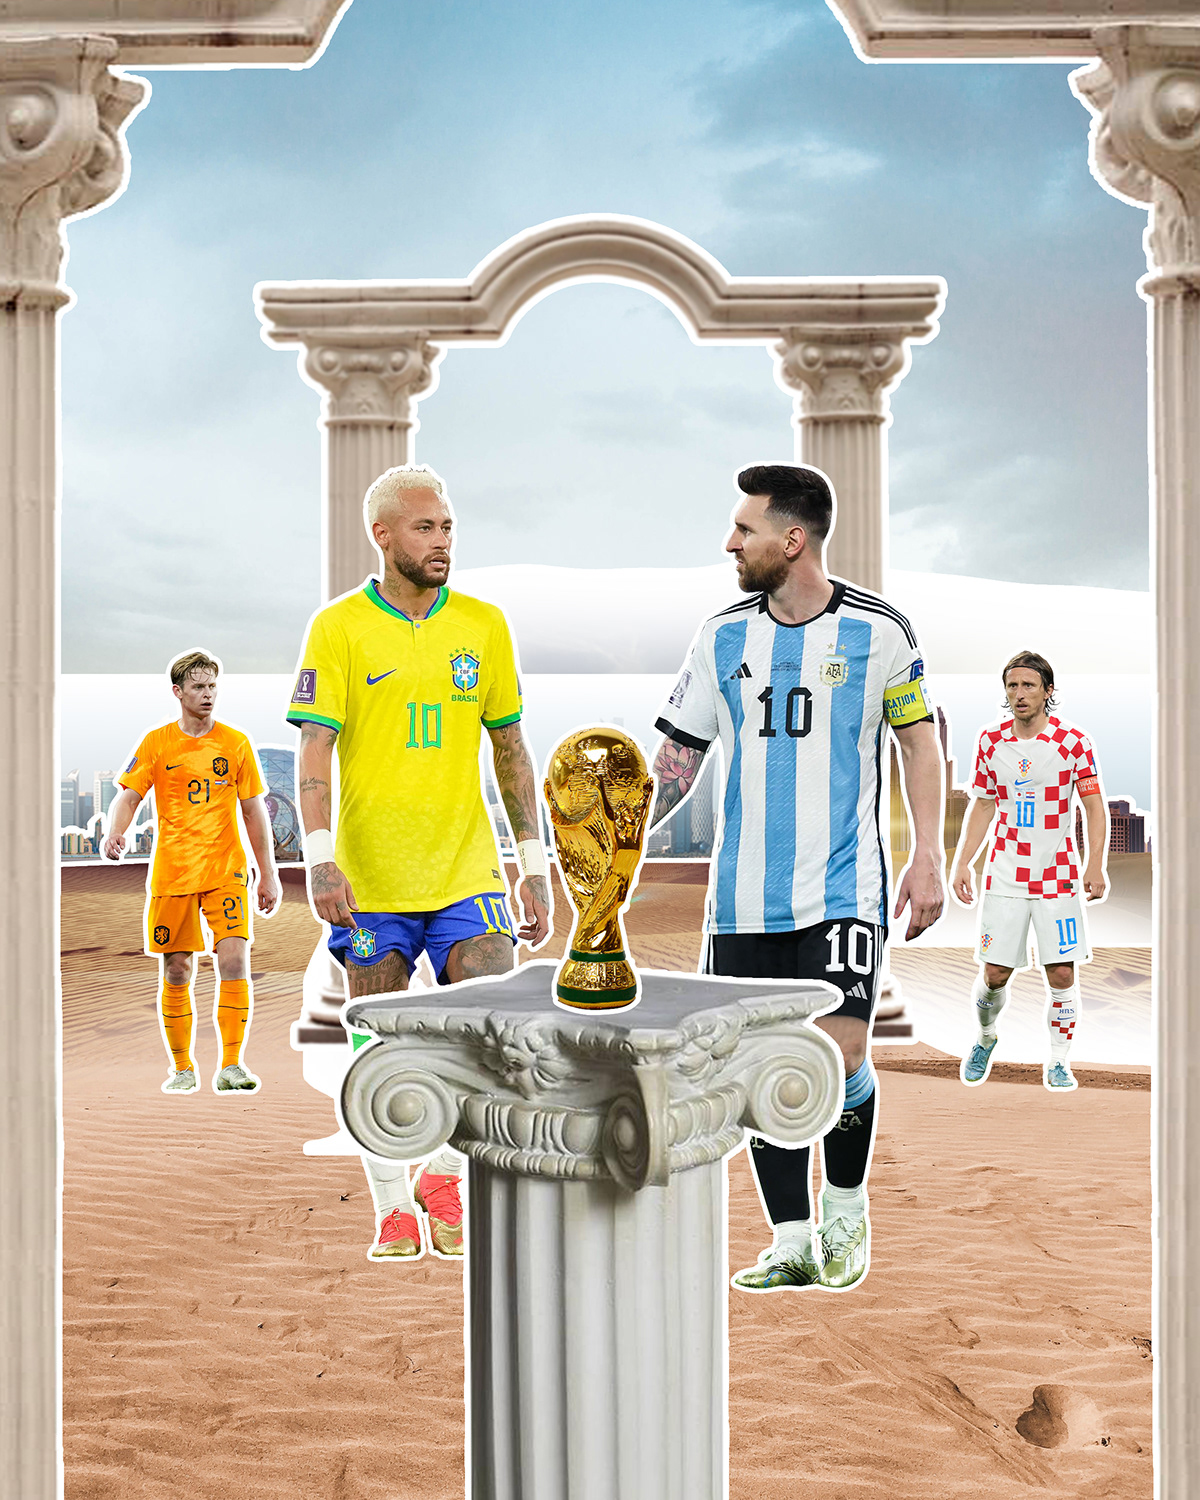 argentina Football poster kr leonel messi manipulation photoshop poster world cup World cup 2022 World Cup Poster